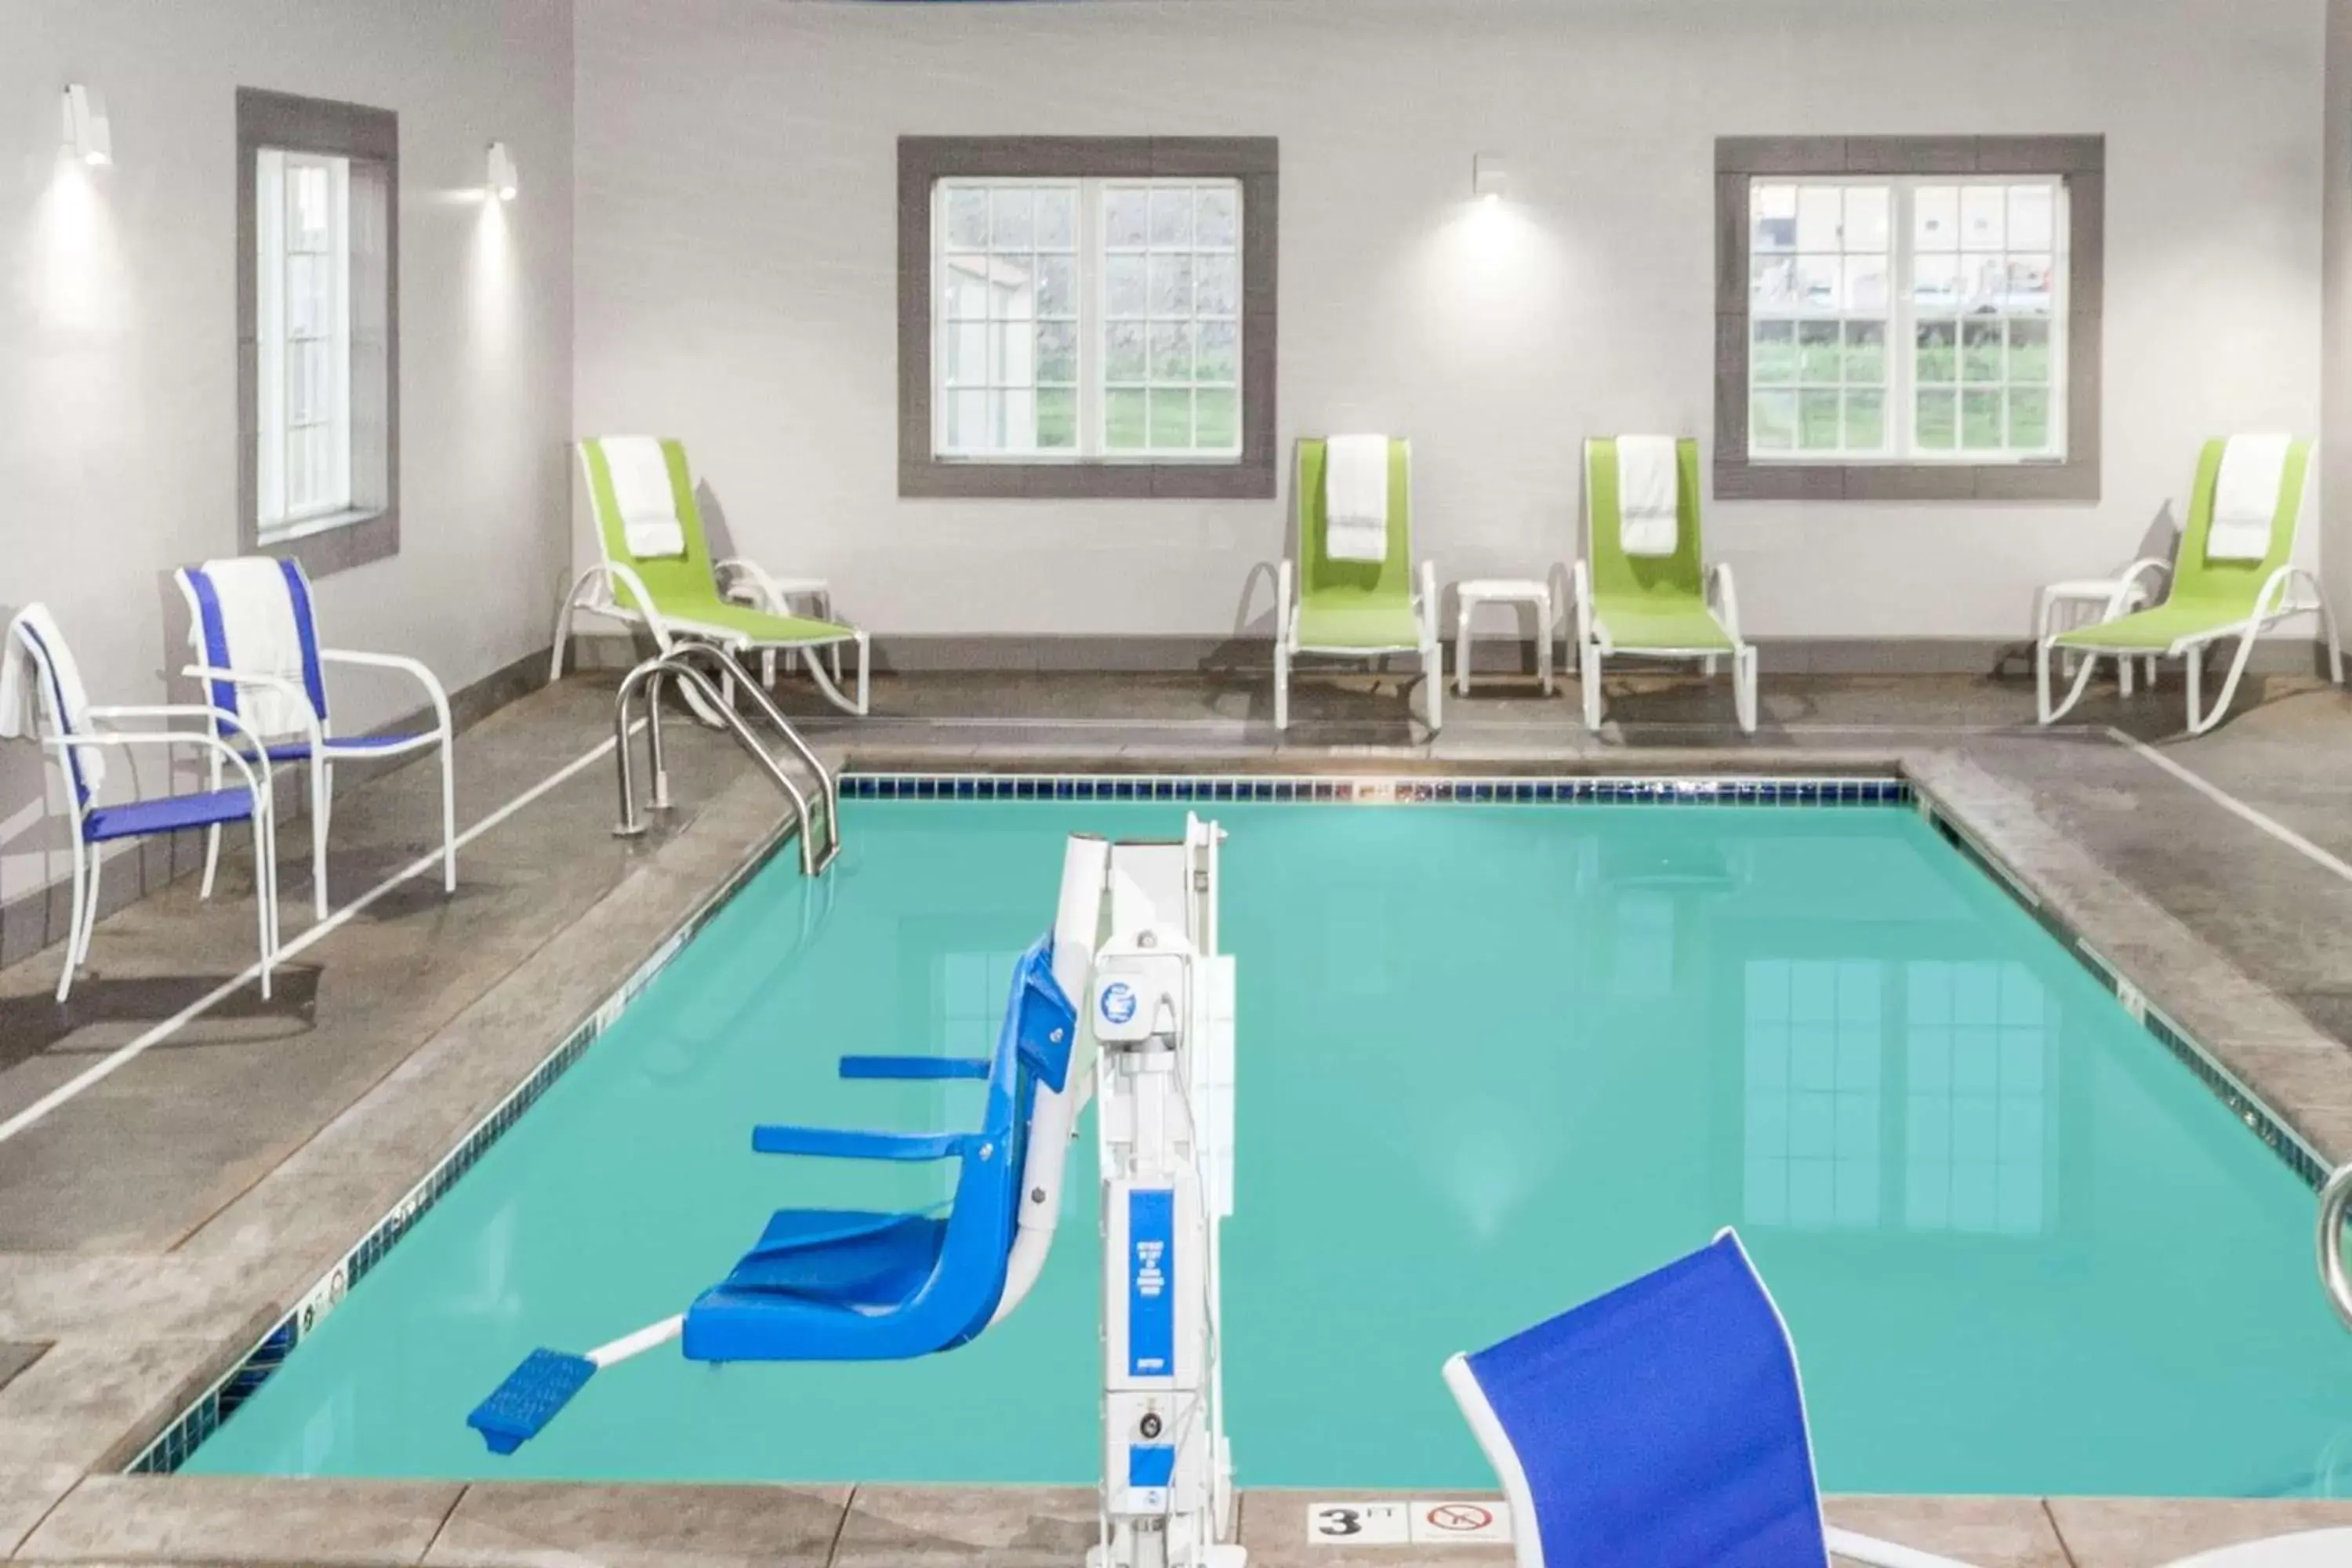 On site, Swimming Pool in Microtel Inn & Suites by Wyndham West Fargo Near Medical Center